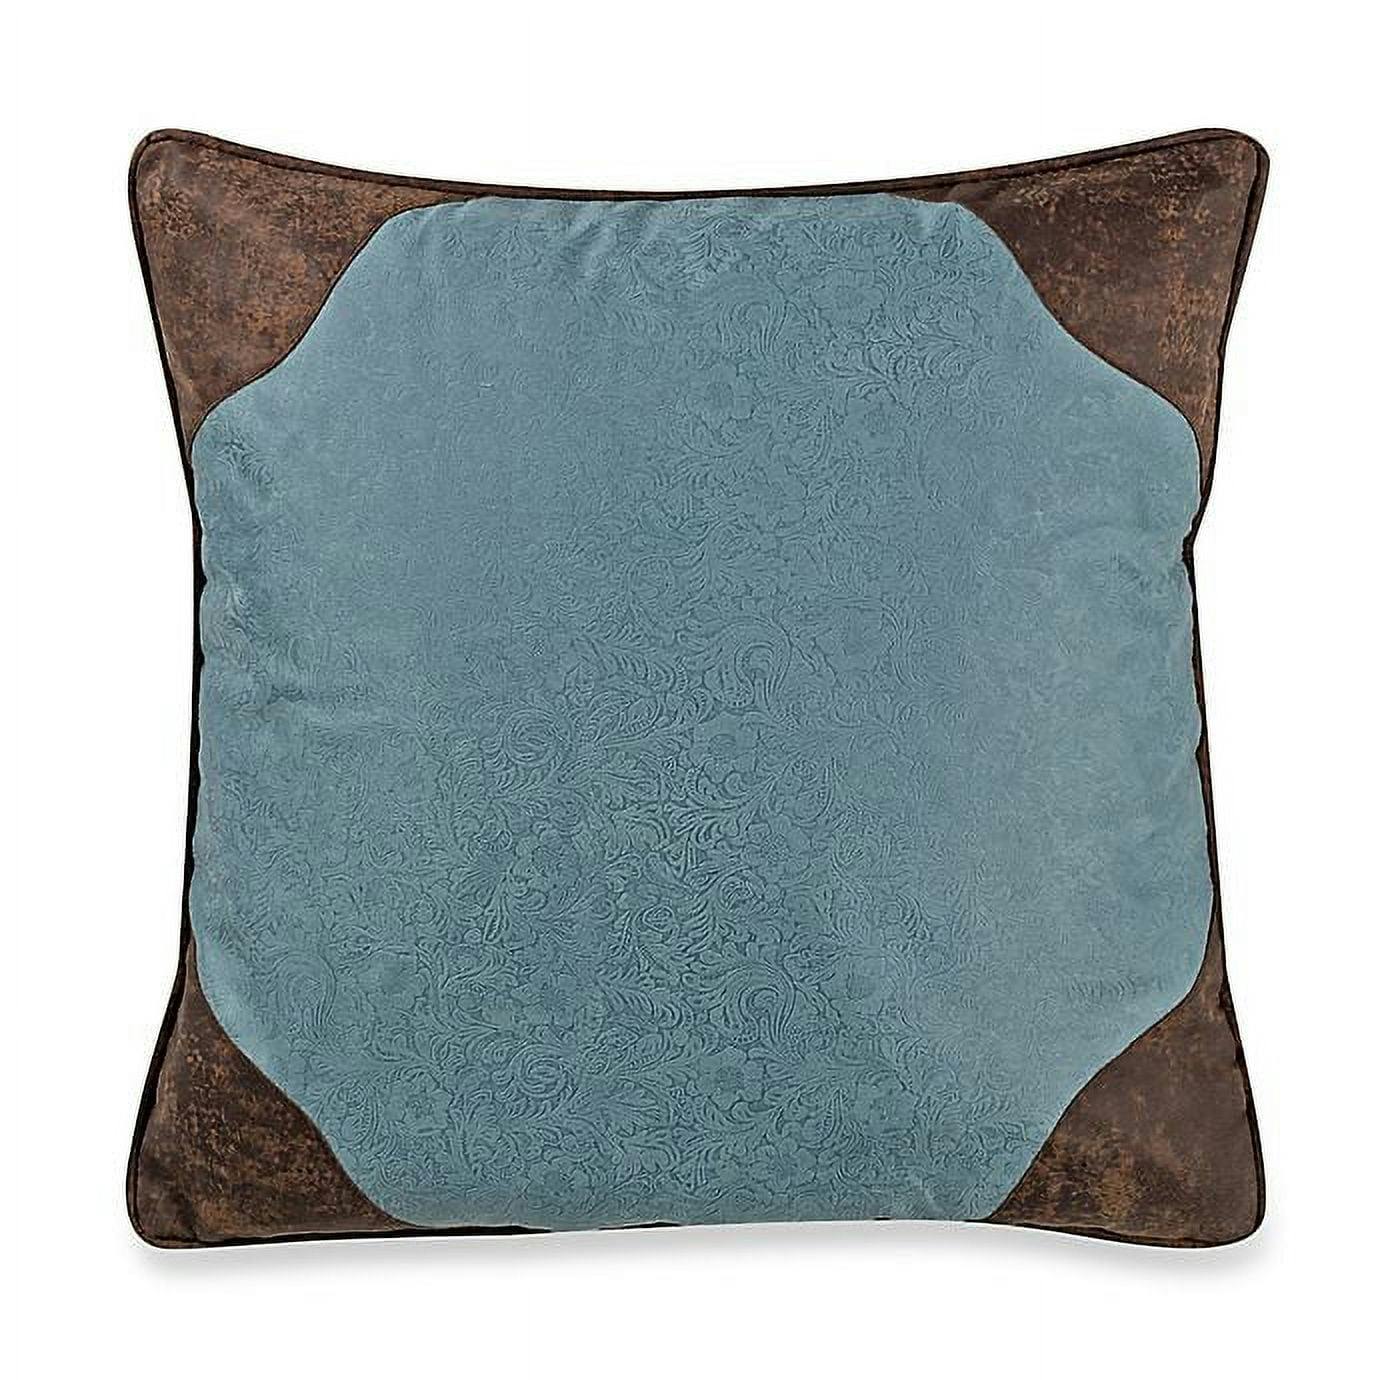 Rustic Turquoise Faux Leather Euro Sham with Scalloped Accents